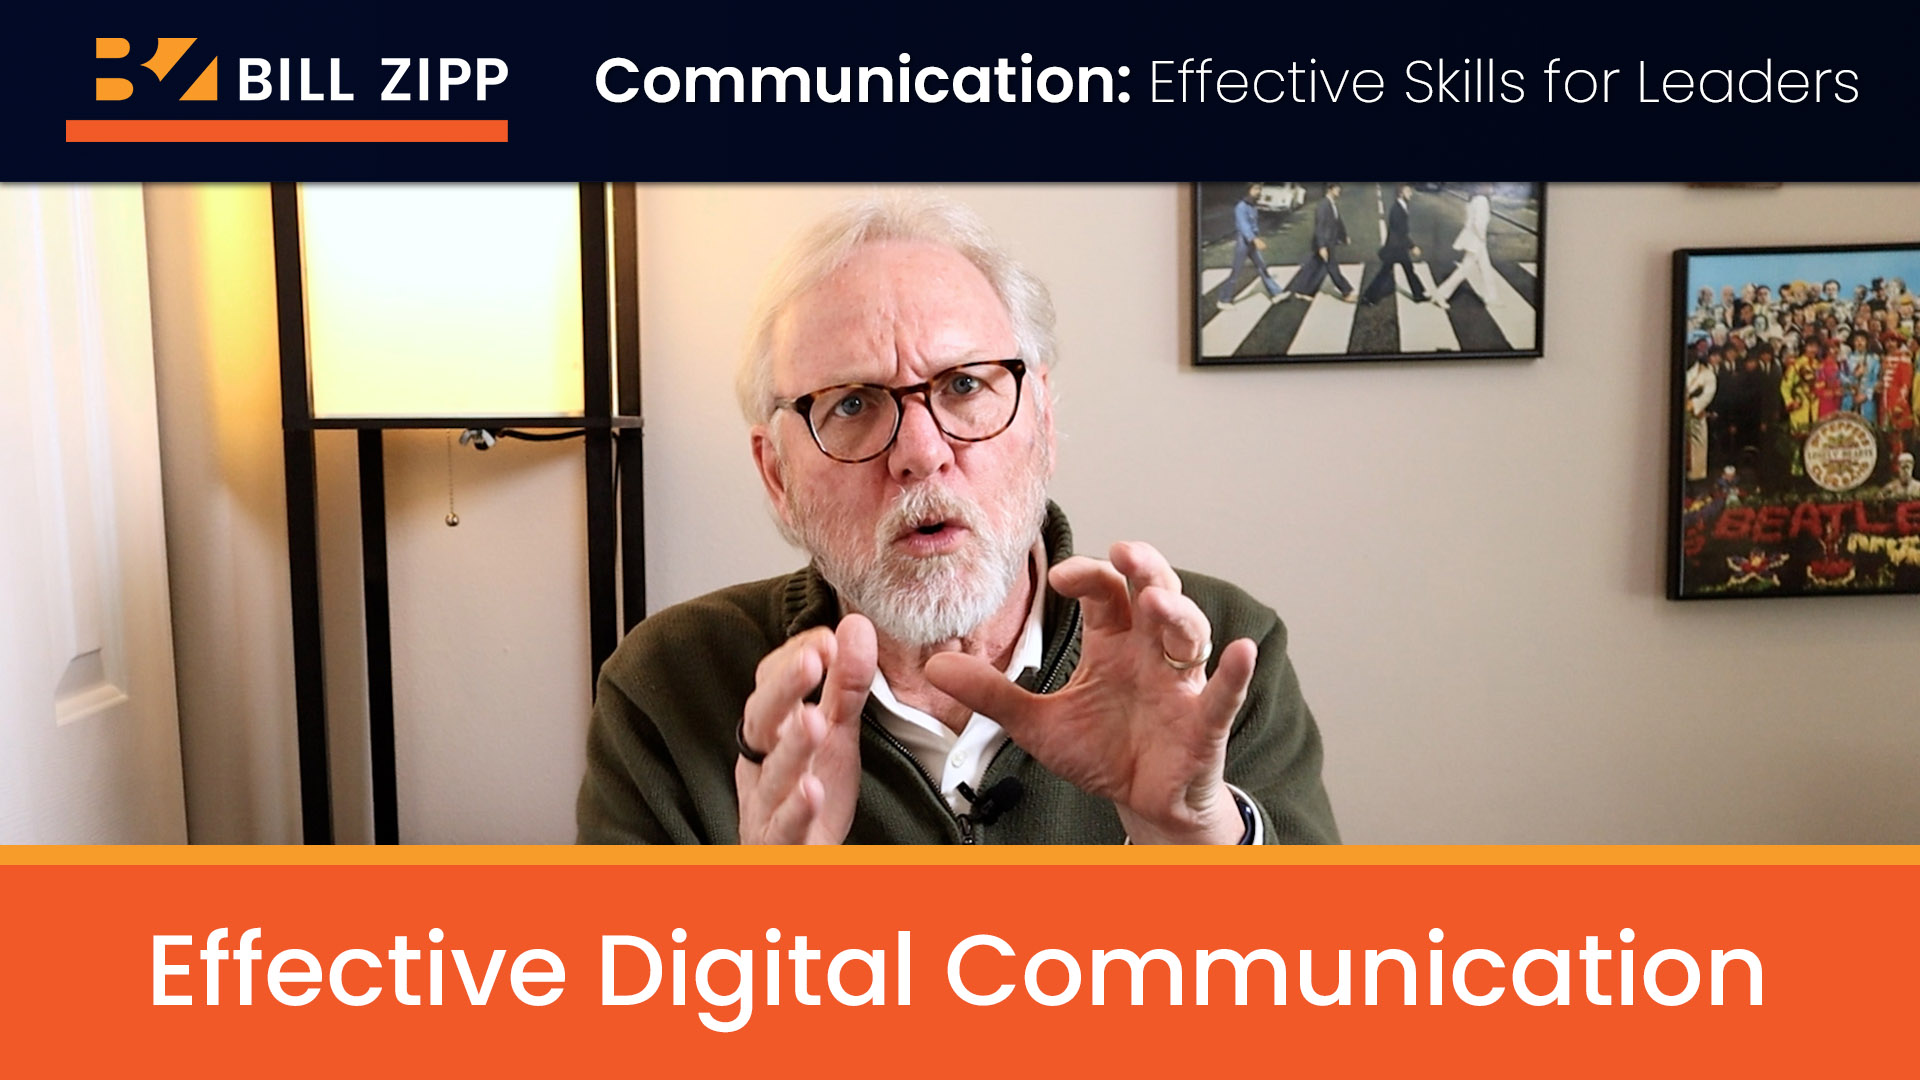 Effective Digital Communication: How to Improve Digital Communication Skills